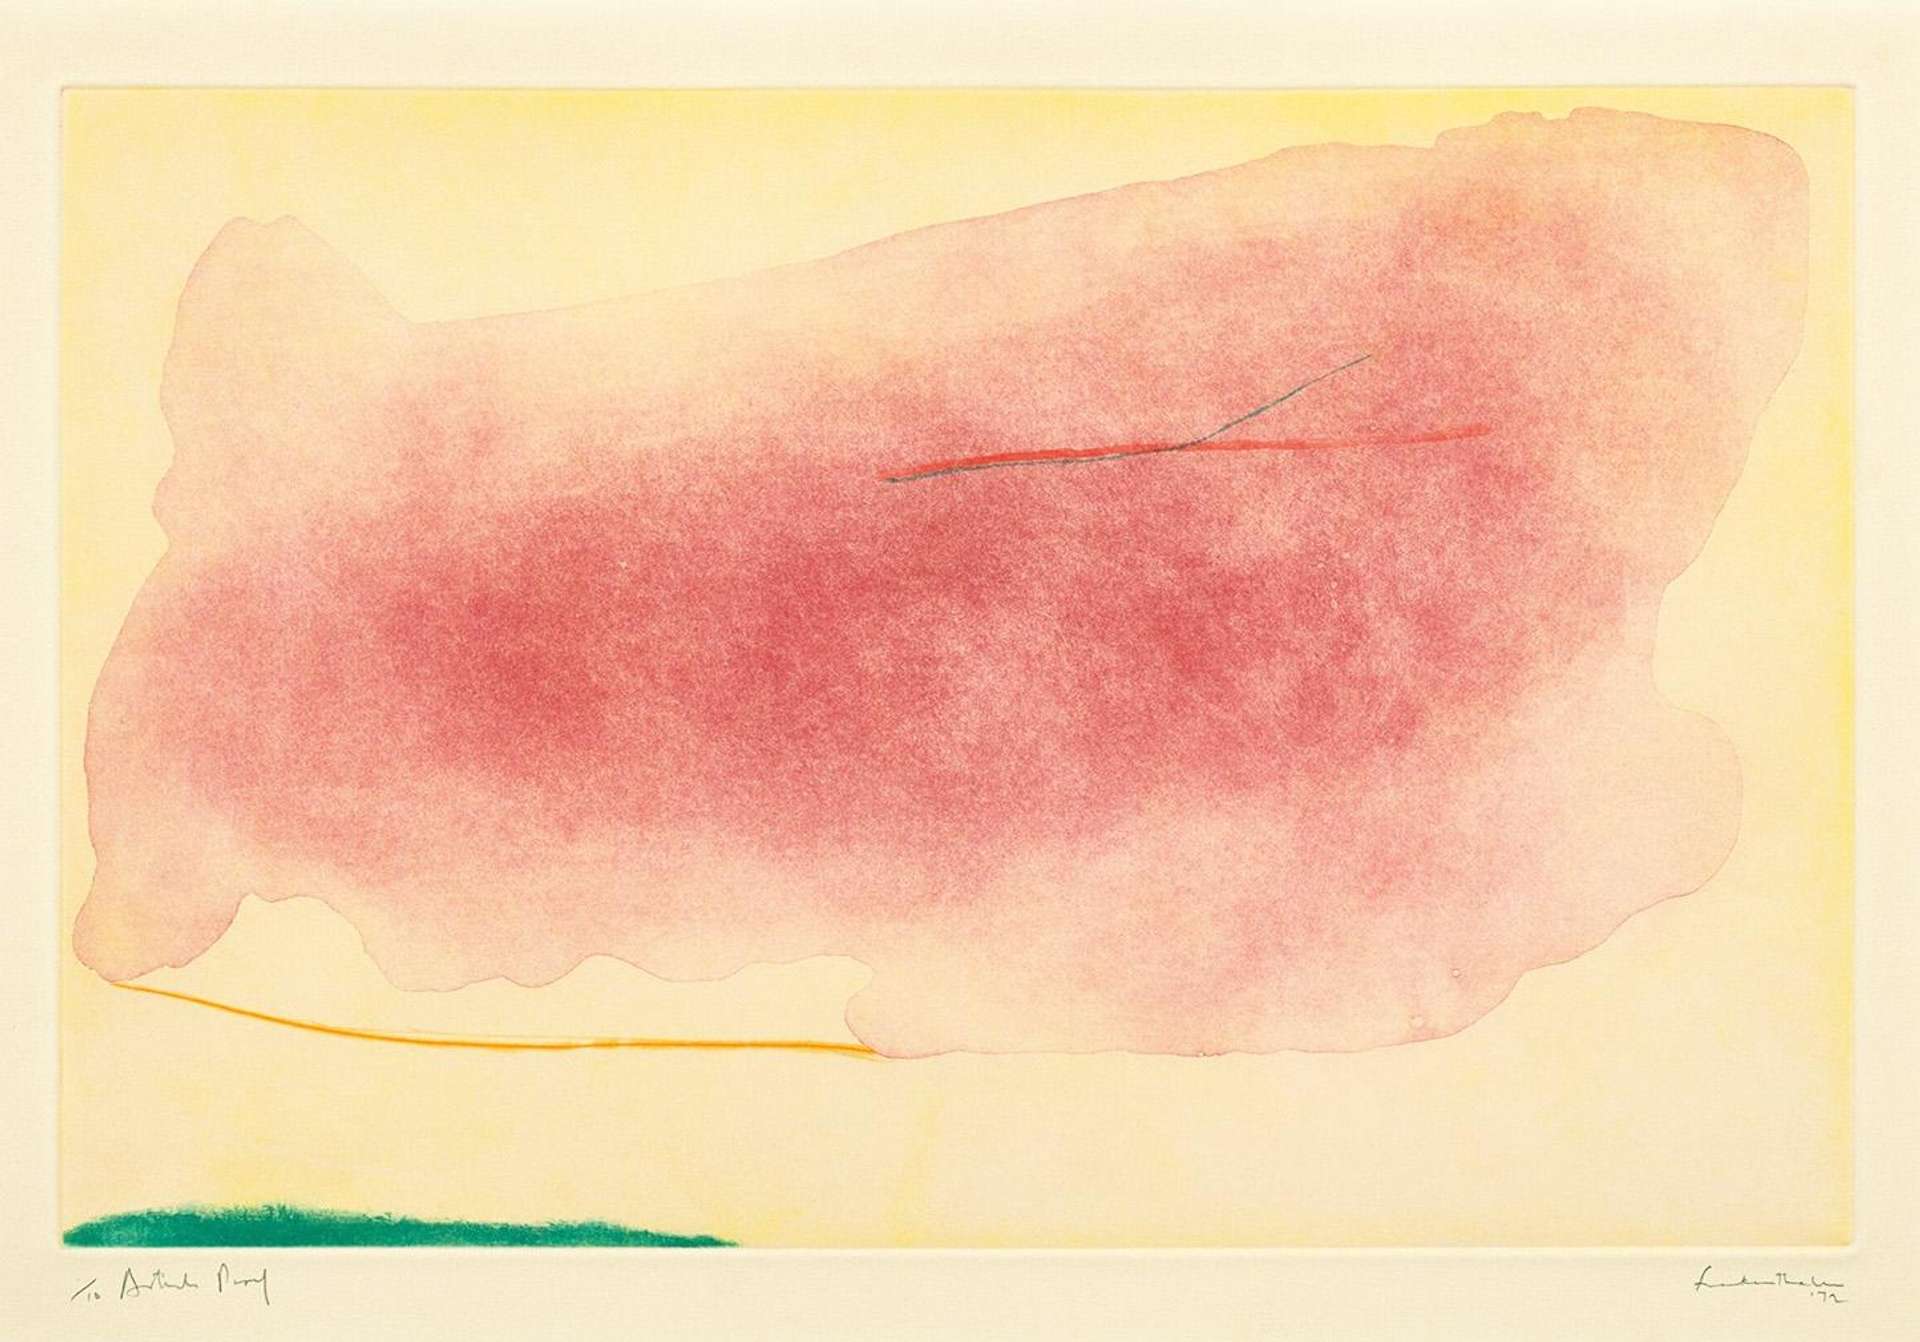 Helen Frankenthaler’s Nepenthe. An abstract expressionist intaglio print of a landscape with a pink sky.